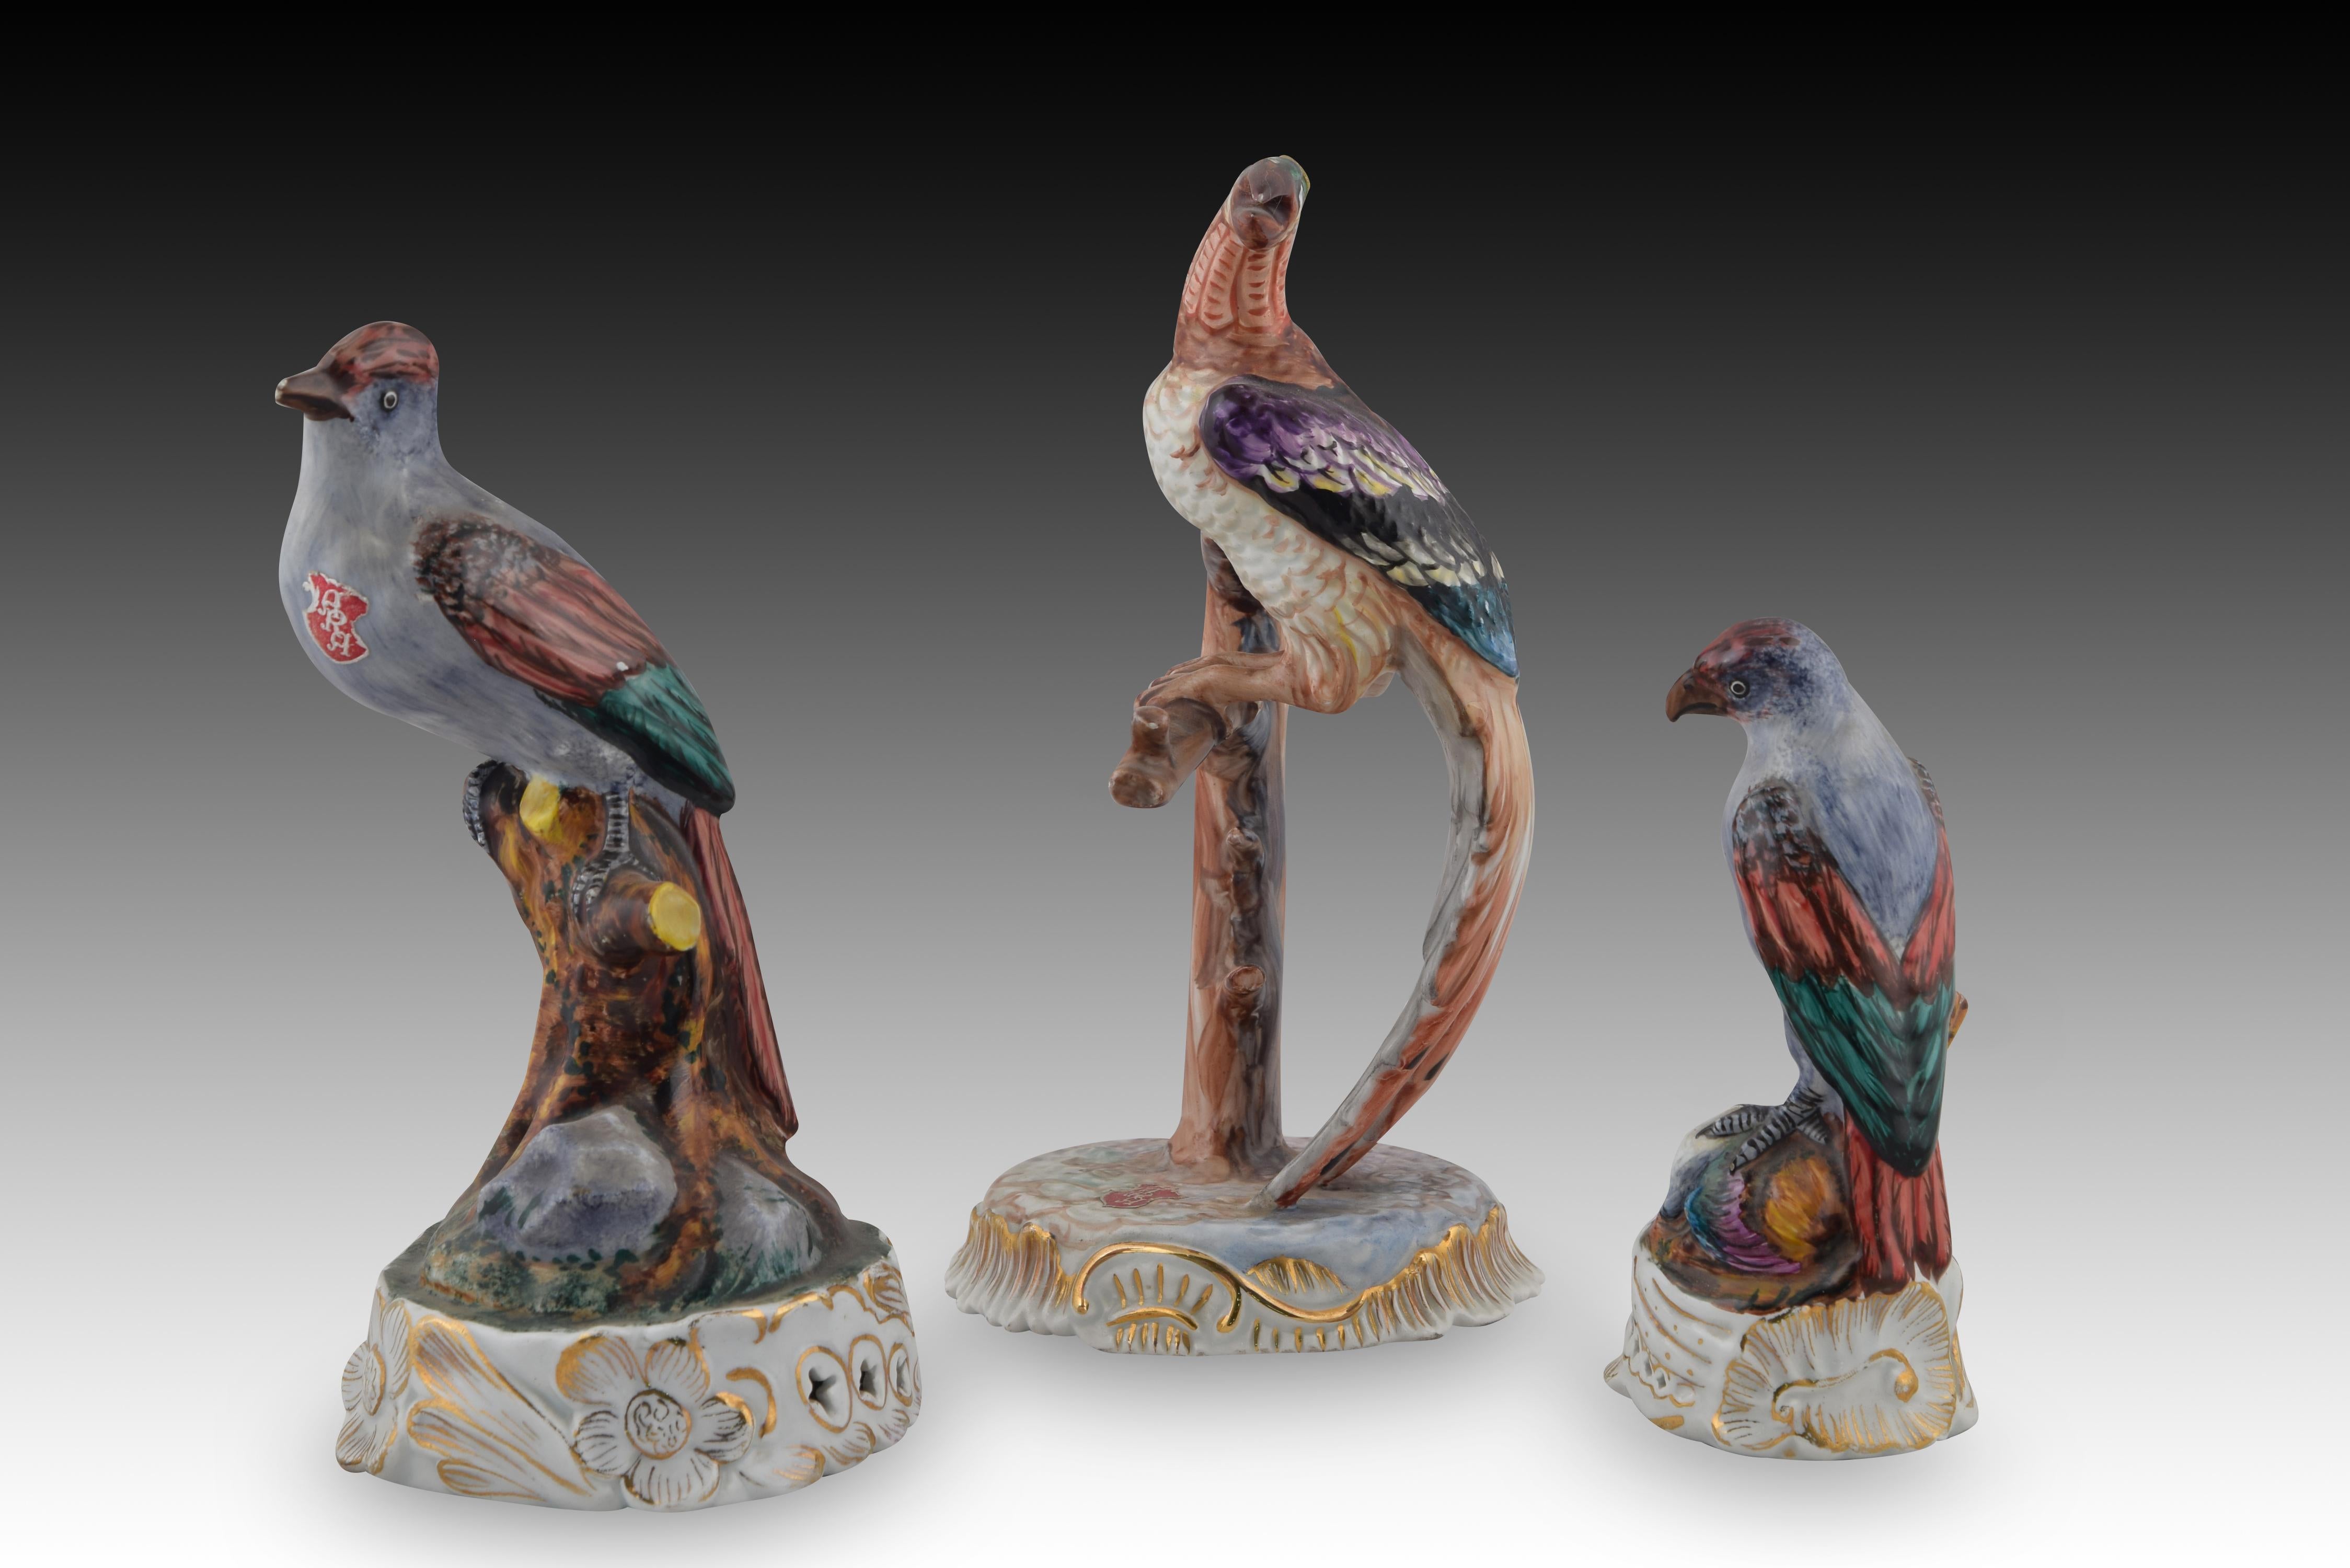 Three birds. Enameled porcelain. Possibly ARA Manises, Valencia, Spain, 20th century. 
Marks on the base. 
One has traces of label. Three birds, different from each other, appear perched on stumps and rocks in each of the three enameled porcelain